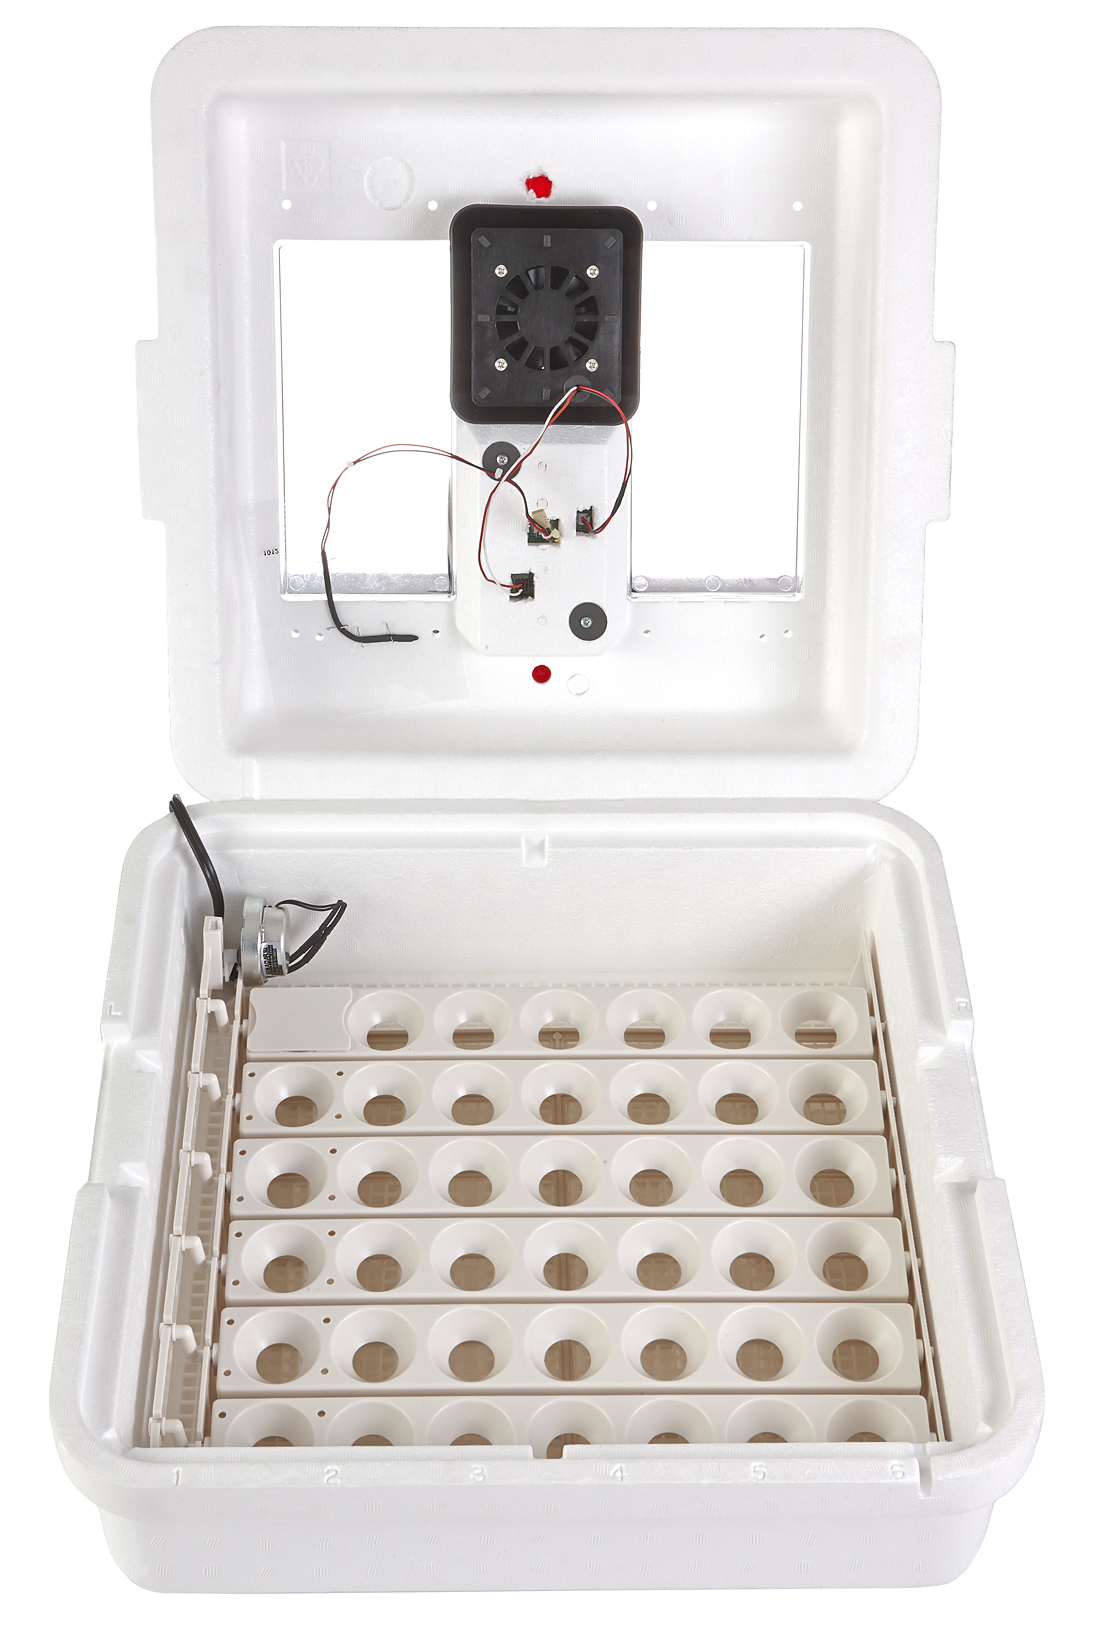 Little Giant 12300 CSA Poultry Incubator